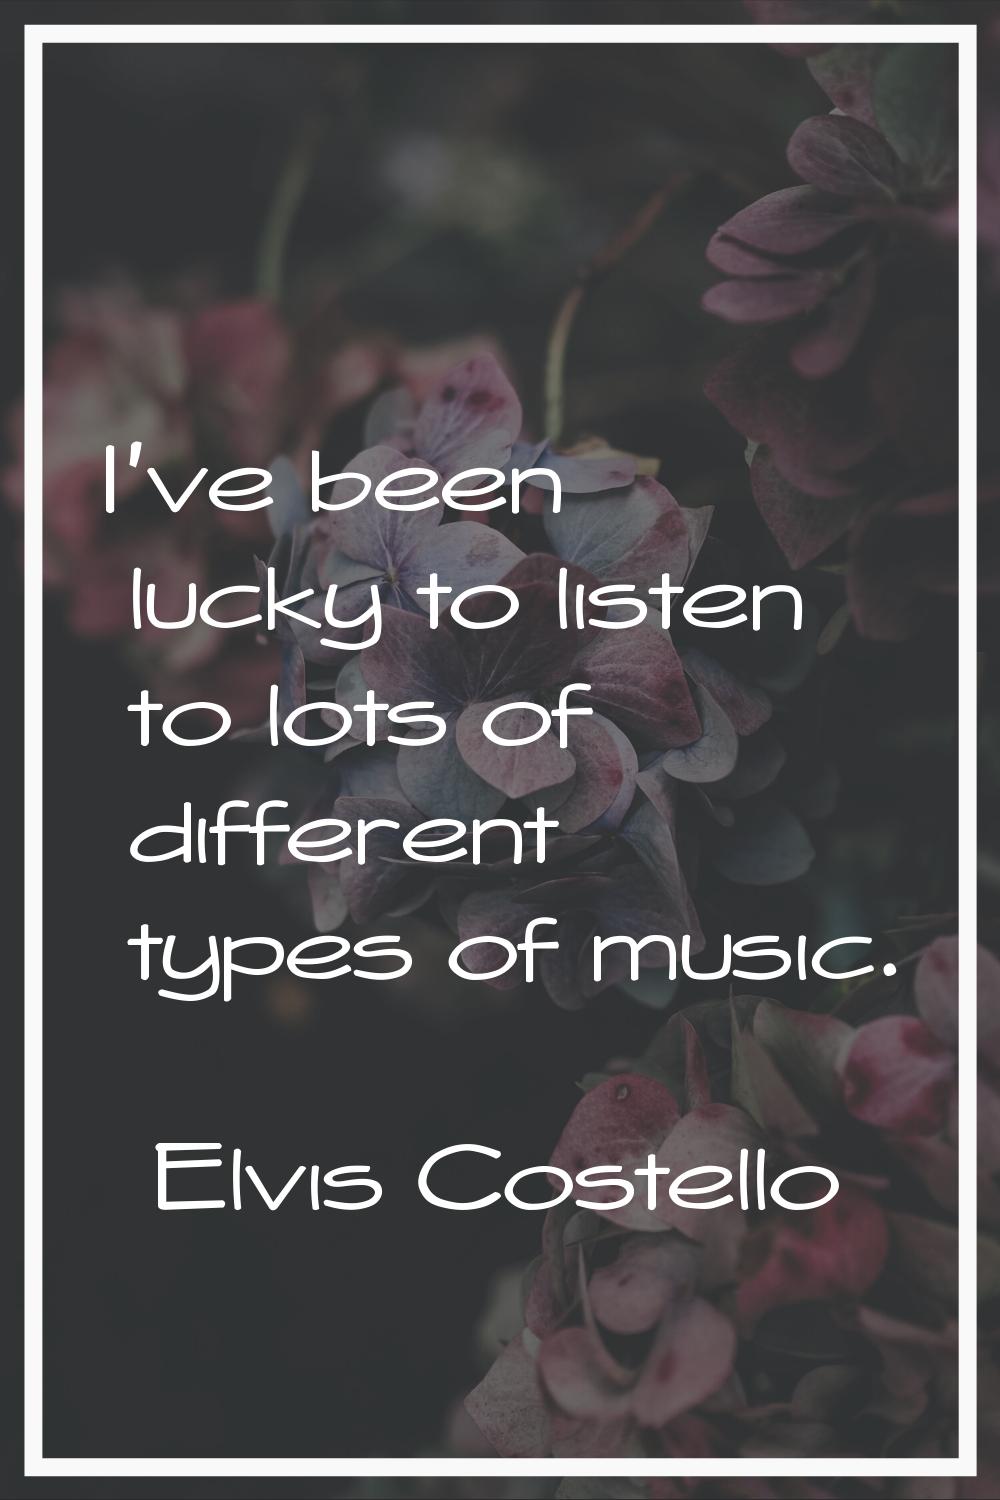 I've been lucky to listen to lots of different types of music.